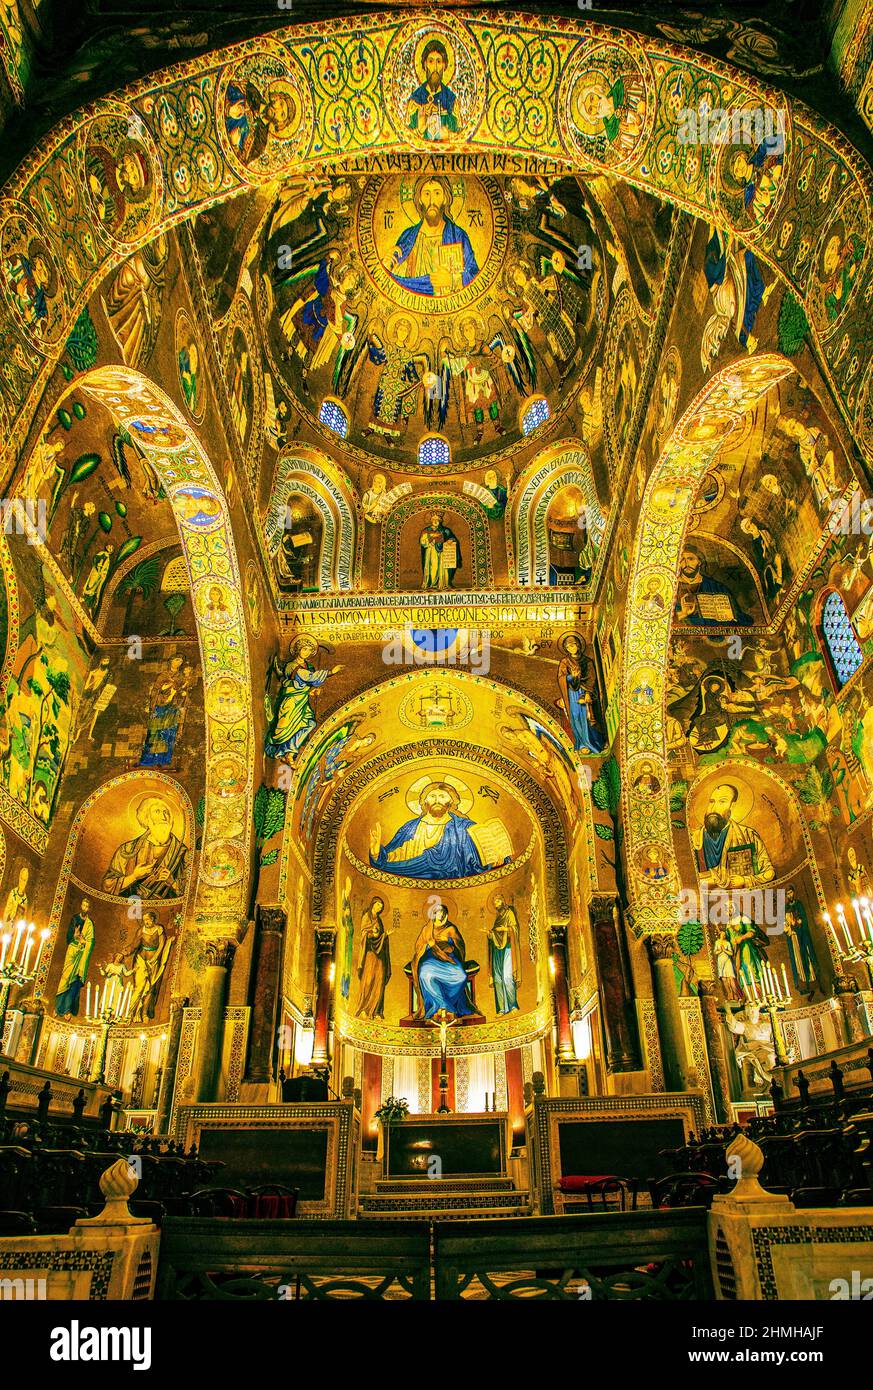 Cappella Palatina (Palatine Chapel) with magnificent gold mosaics in the Palazzo Reale (Palazzo dei Normanni), Palermo, Sicily, Italy Stock Photo